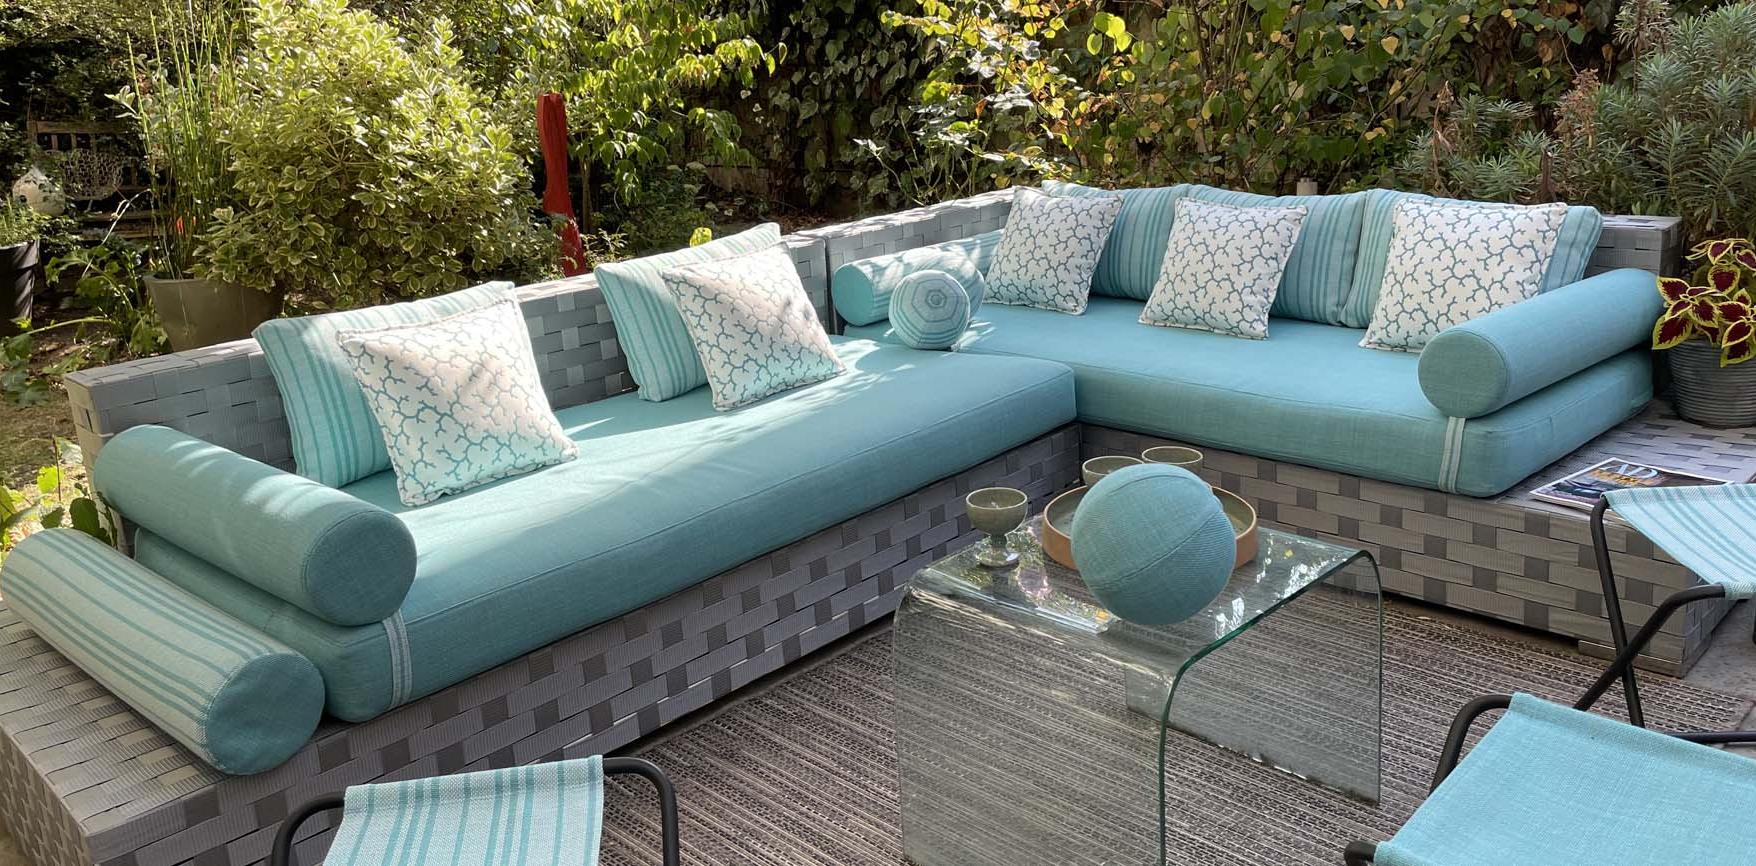 Complete renovation of a sofa. The advantage : outdoor fabrics from Maria Flora / Pierre Frey